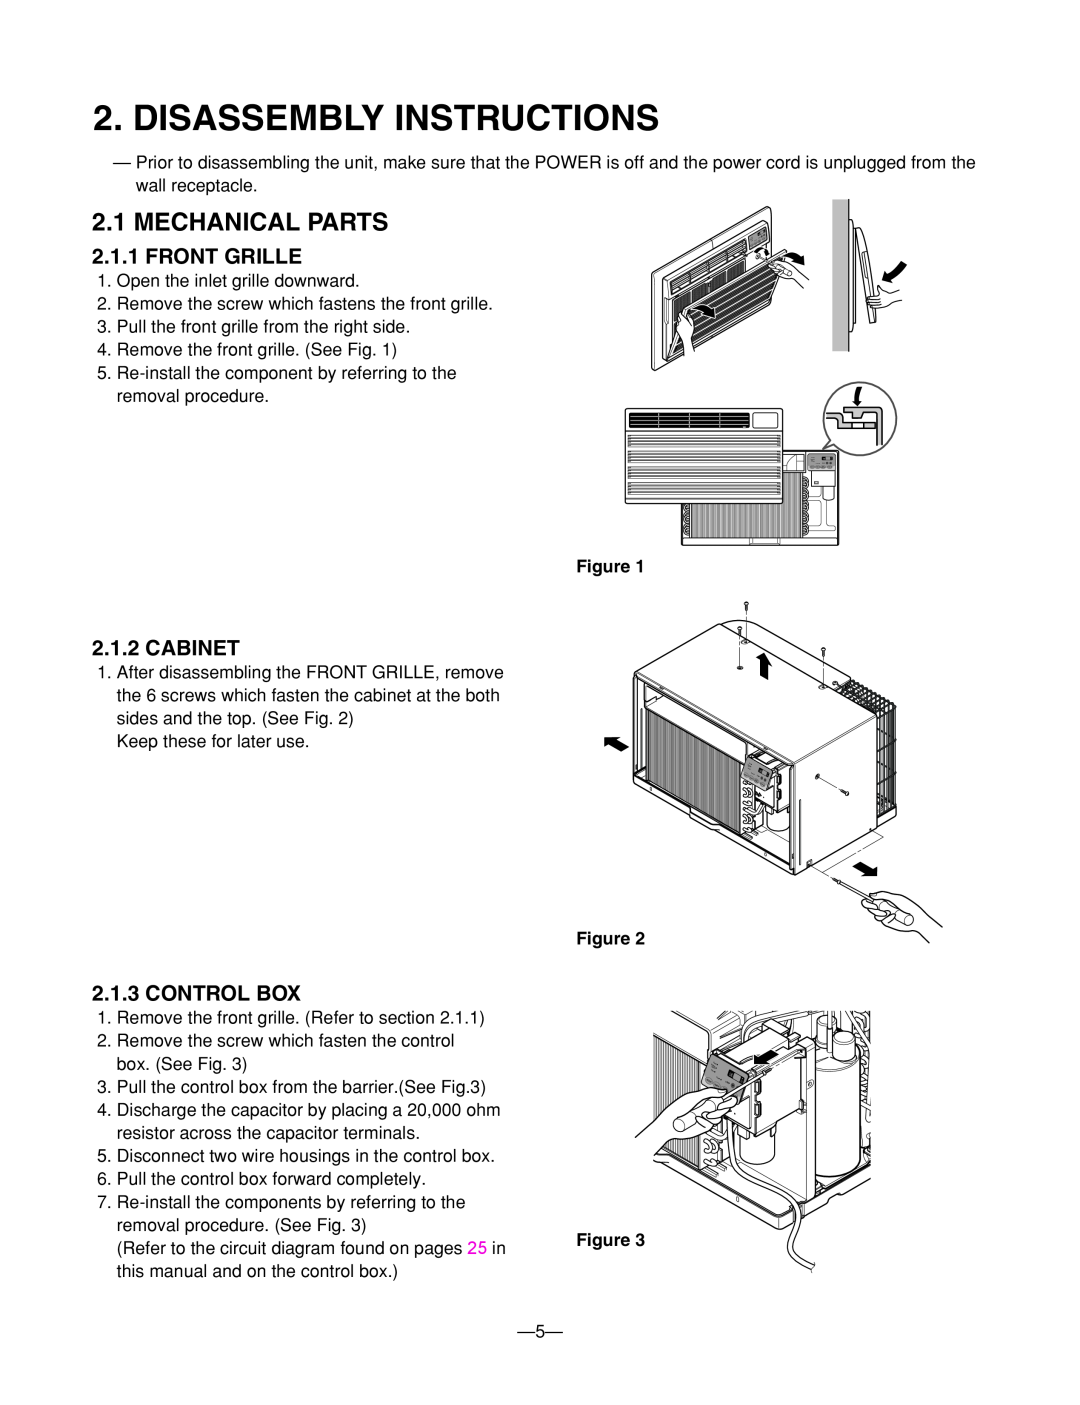 Heat Controller BG-101A, BG-81A, BG-123A Disassembly Instructions, Mechanical Parts, Front Grille, Cabinet, Control Box 